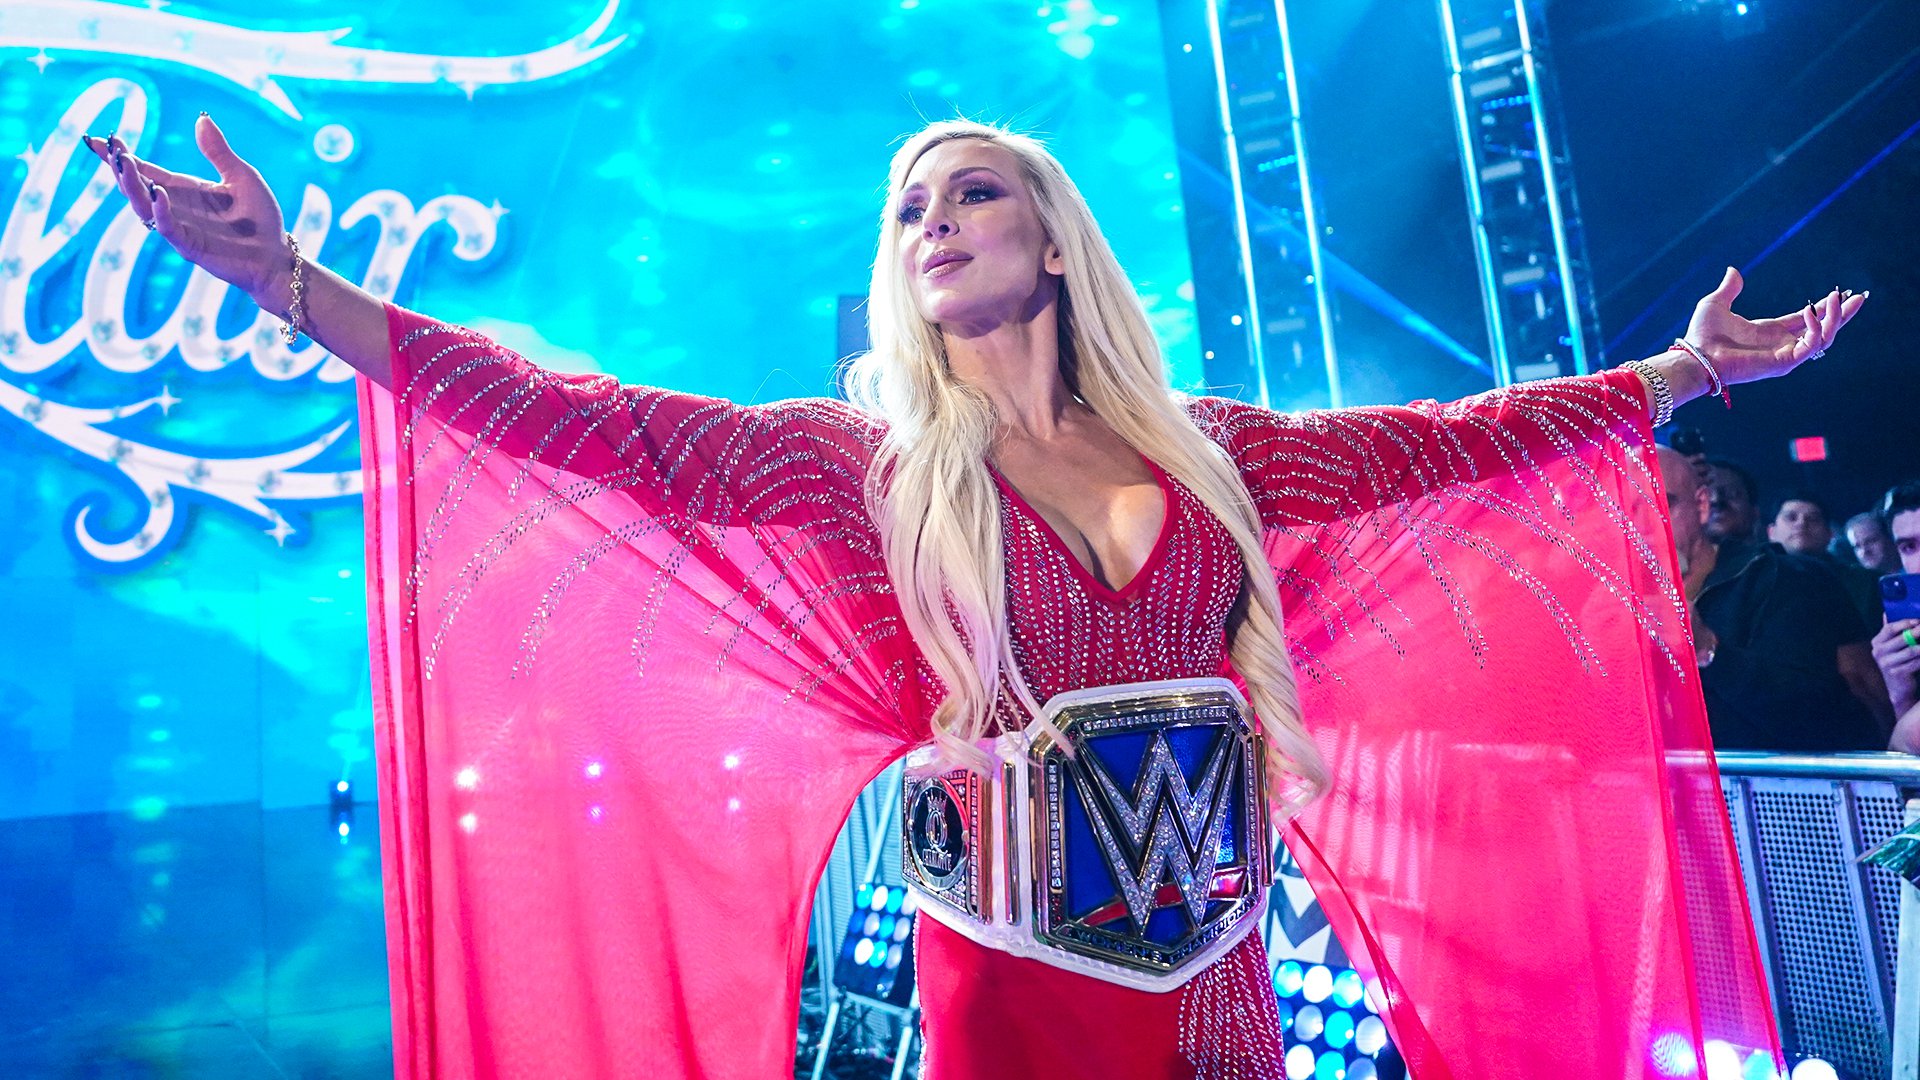 WWE Smackdown: Charlotte Flair Wants To “Get To That Male Level Of John Cena” 2